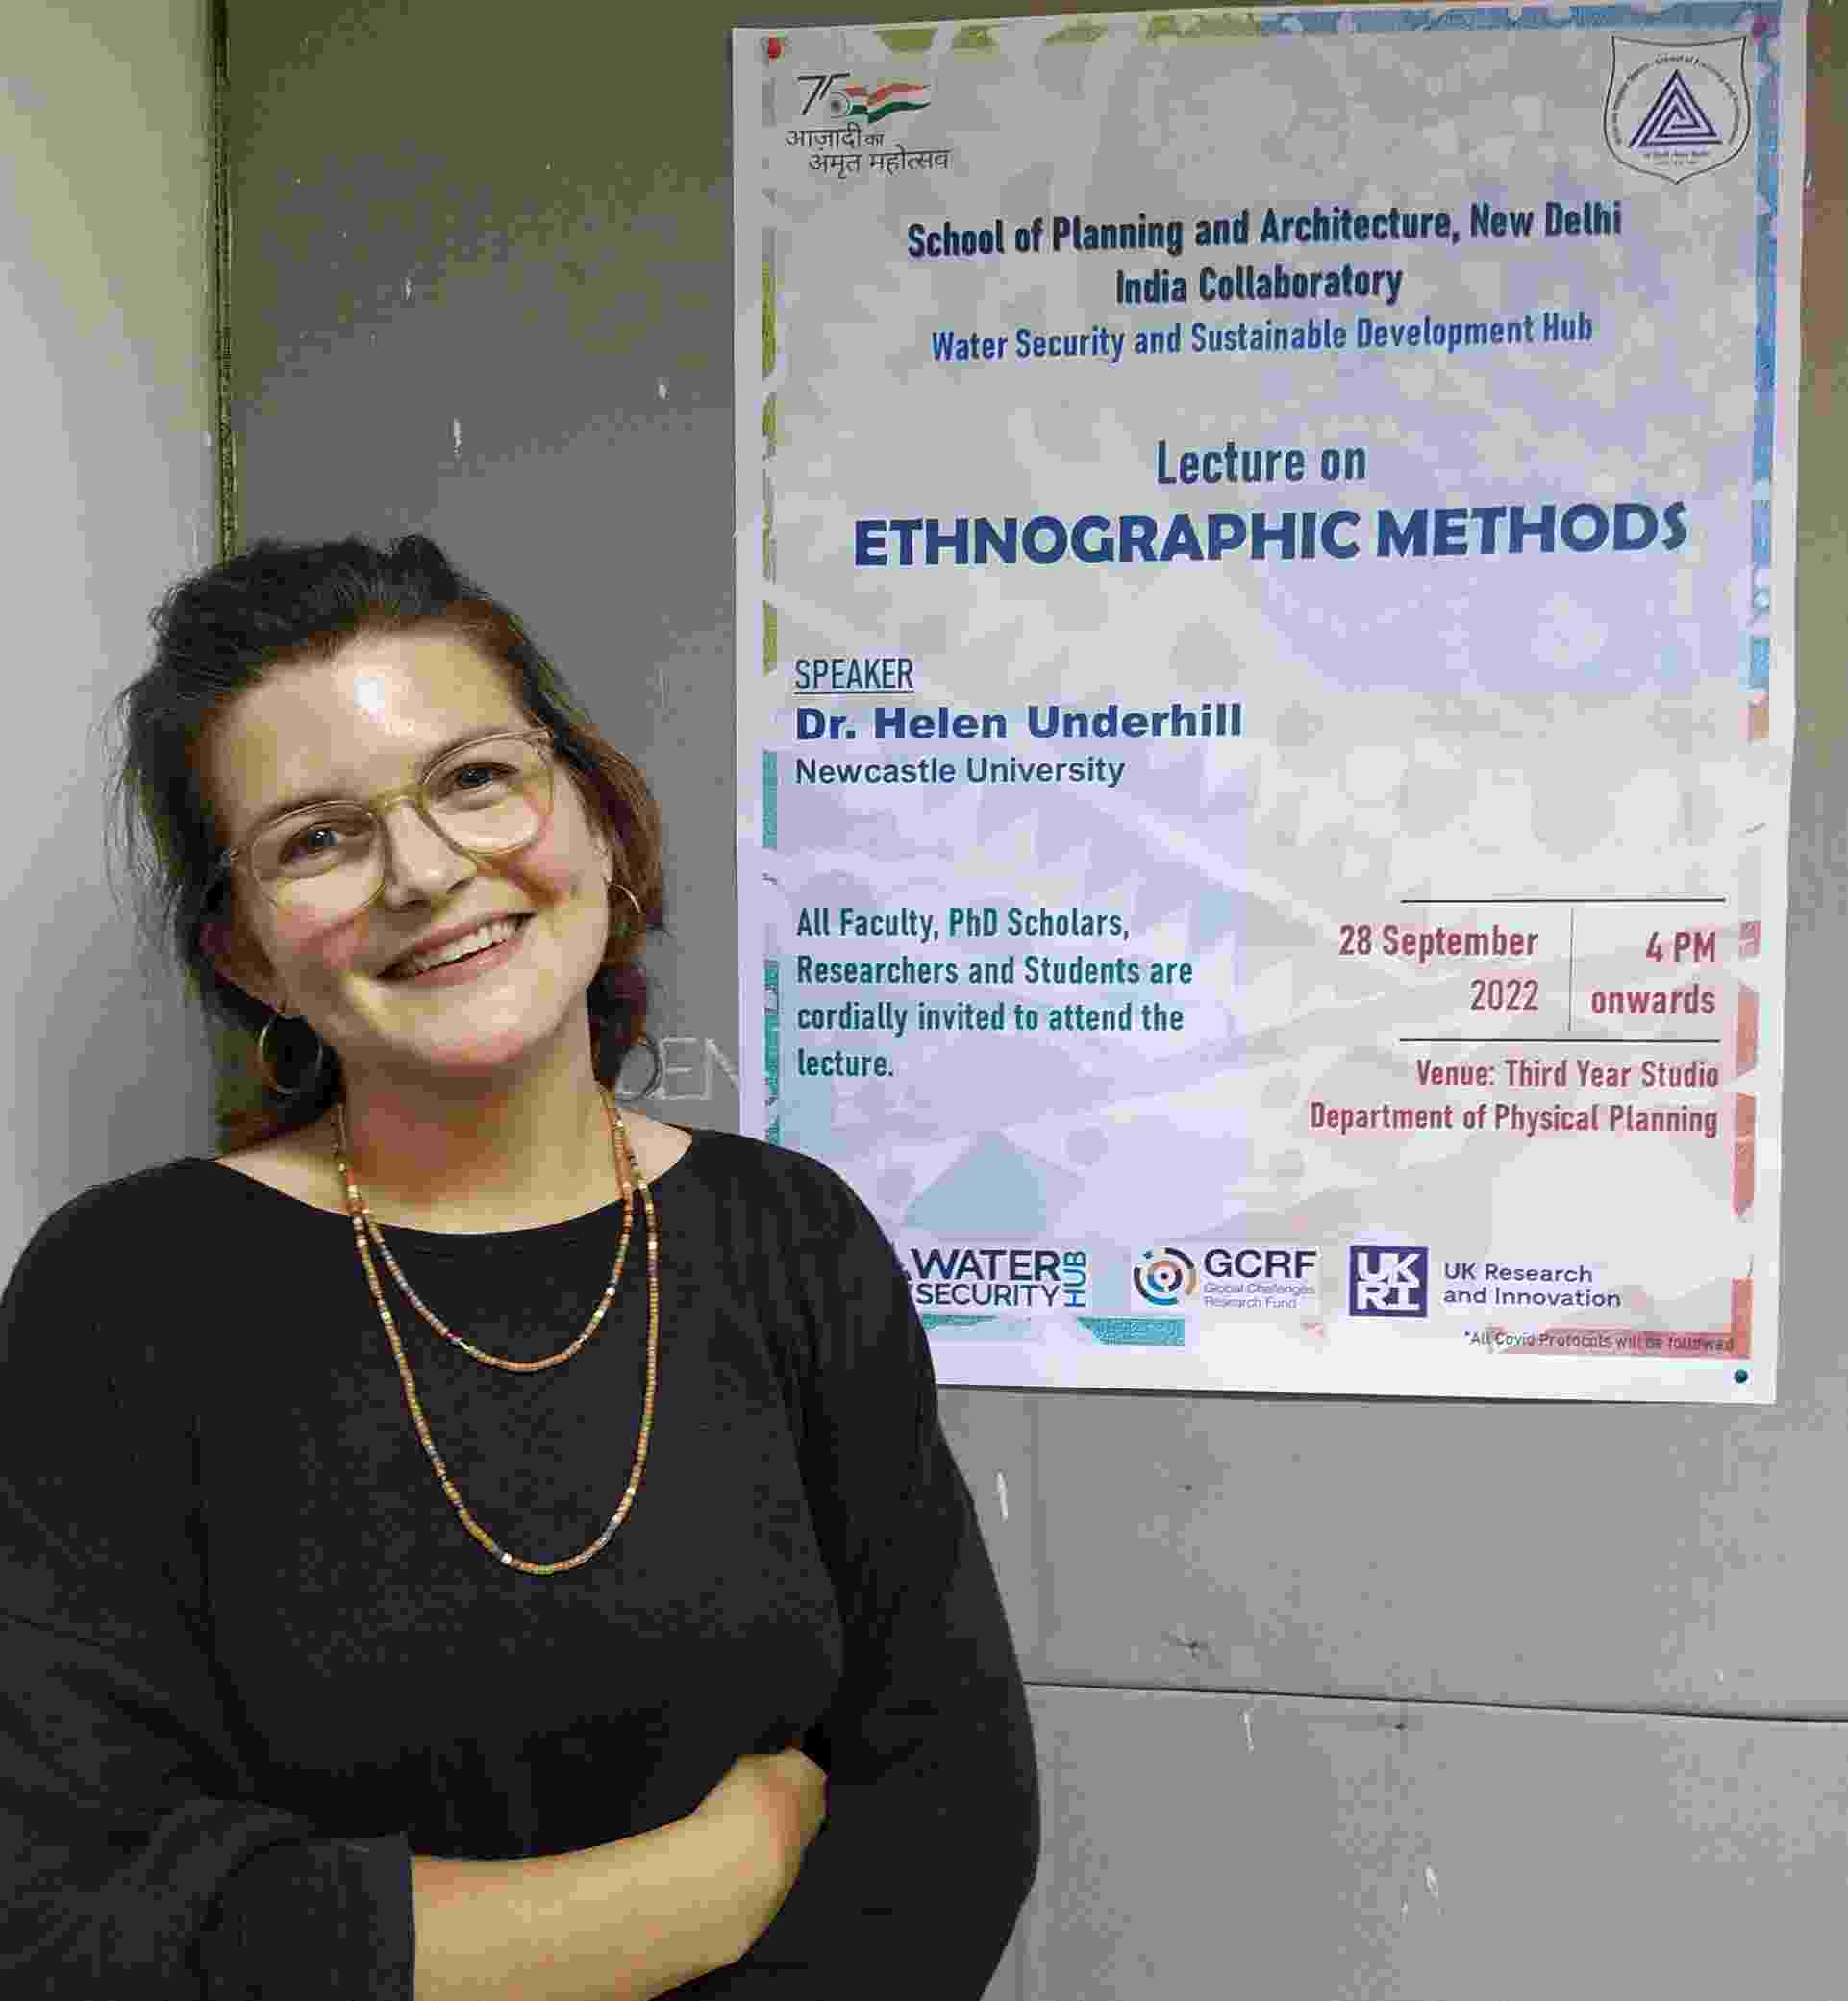 Helen smiles at the camera, stood in front of a poster that reads 'Lecture on Ethnographic Methods'